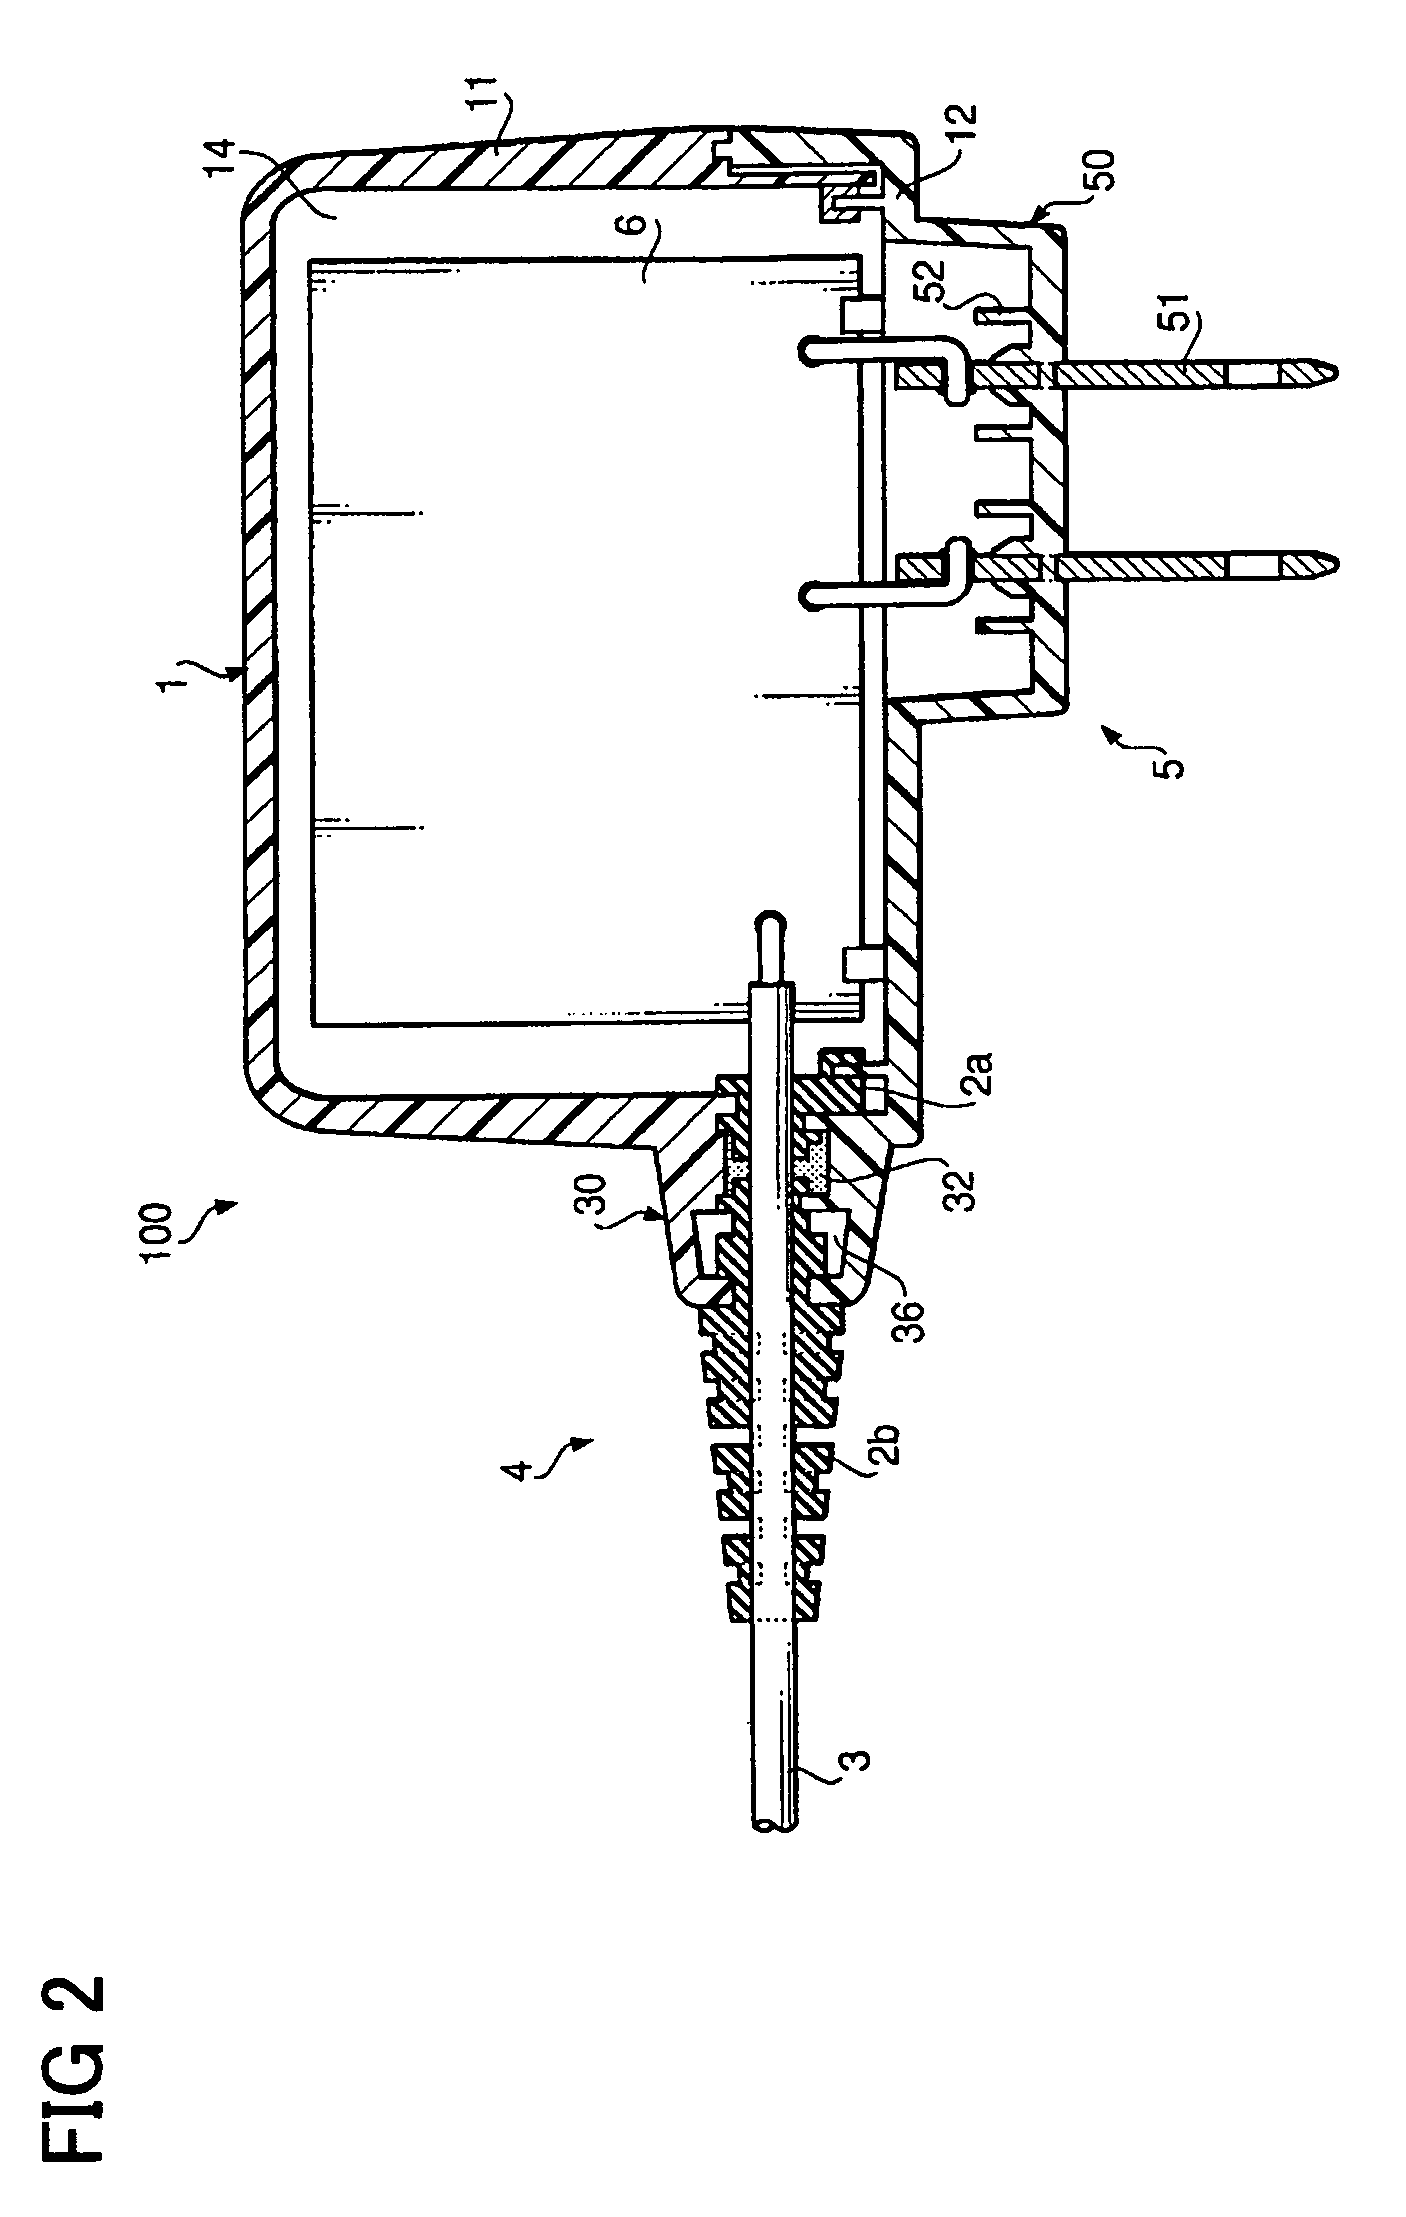 Waterproof case for electrical apparatus